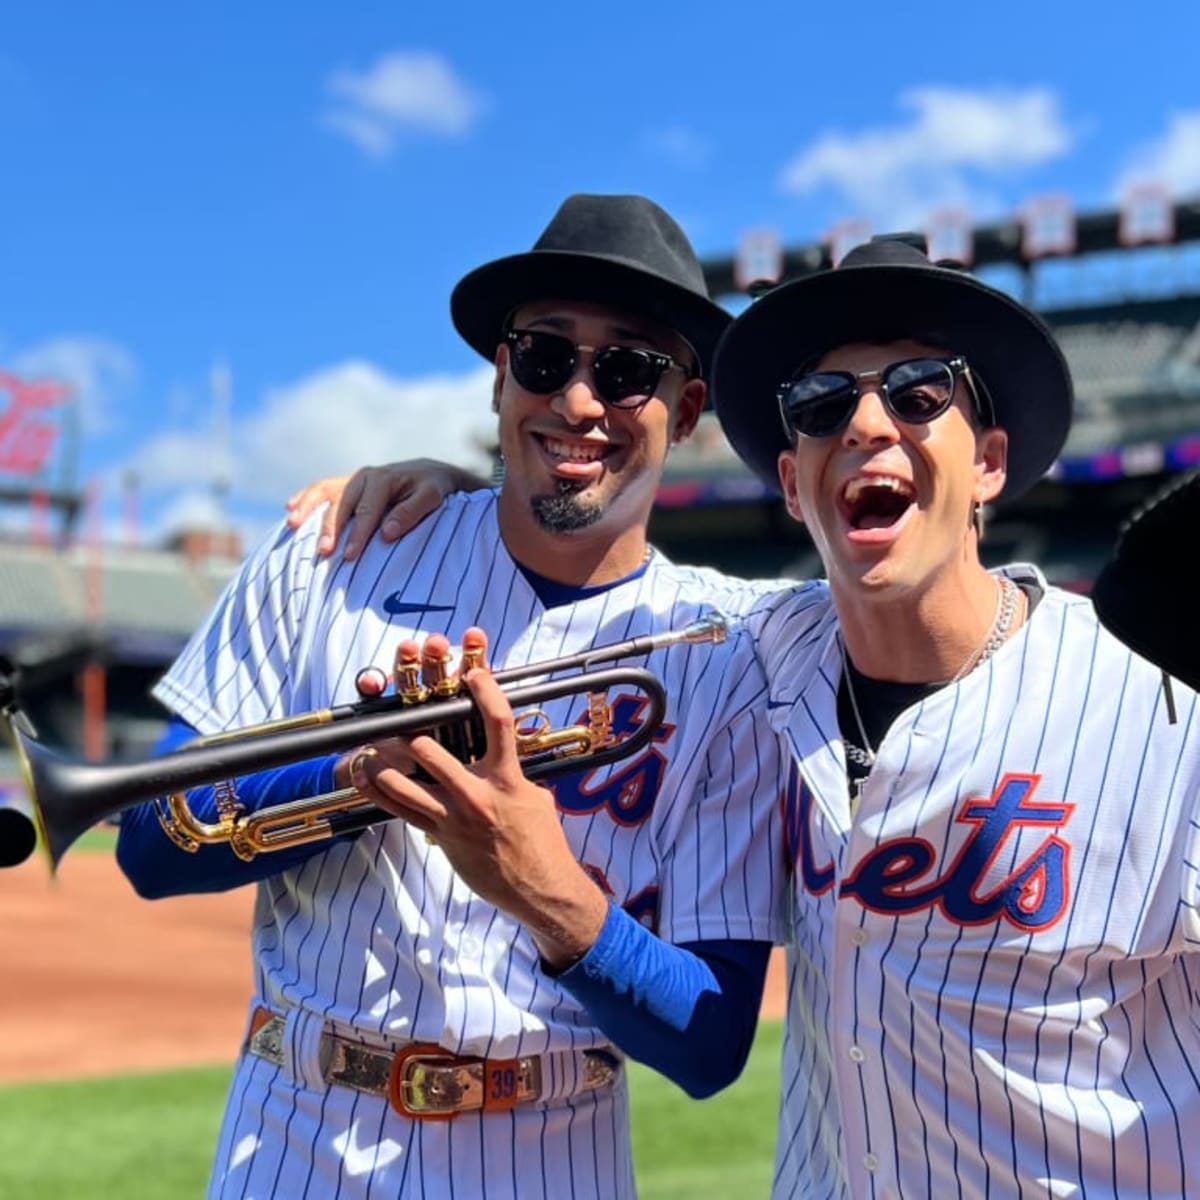 Narco' Song Soars Due to Mets' Edwin Diaz and Hague/Aussie Musicians